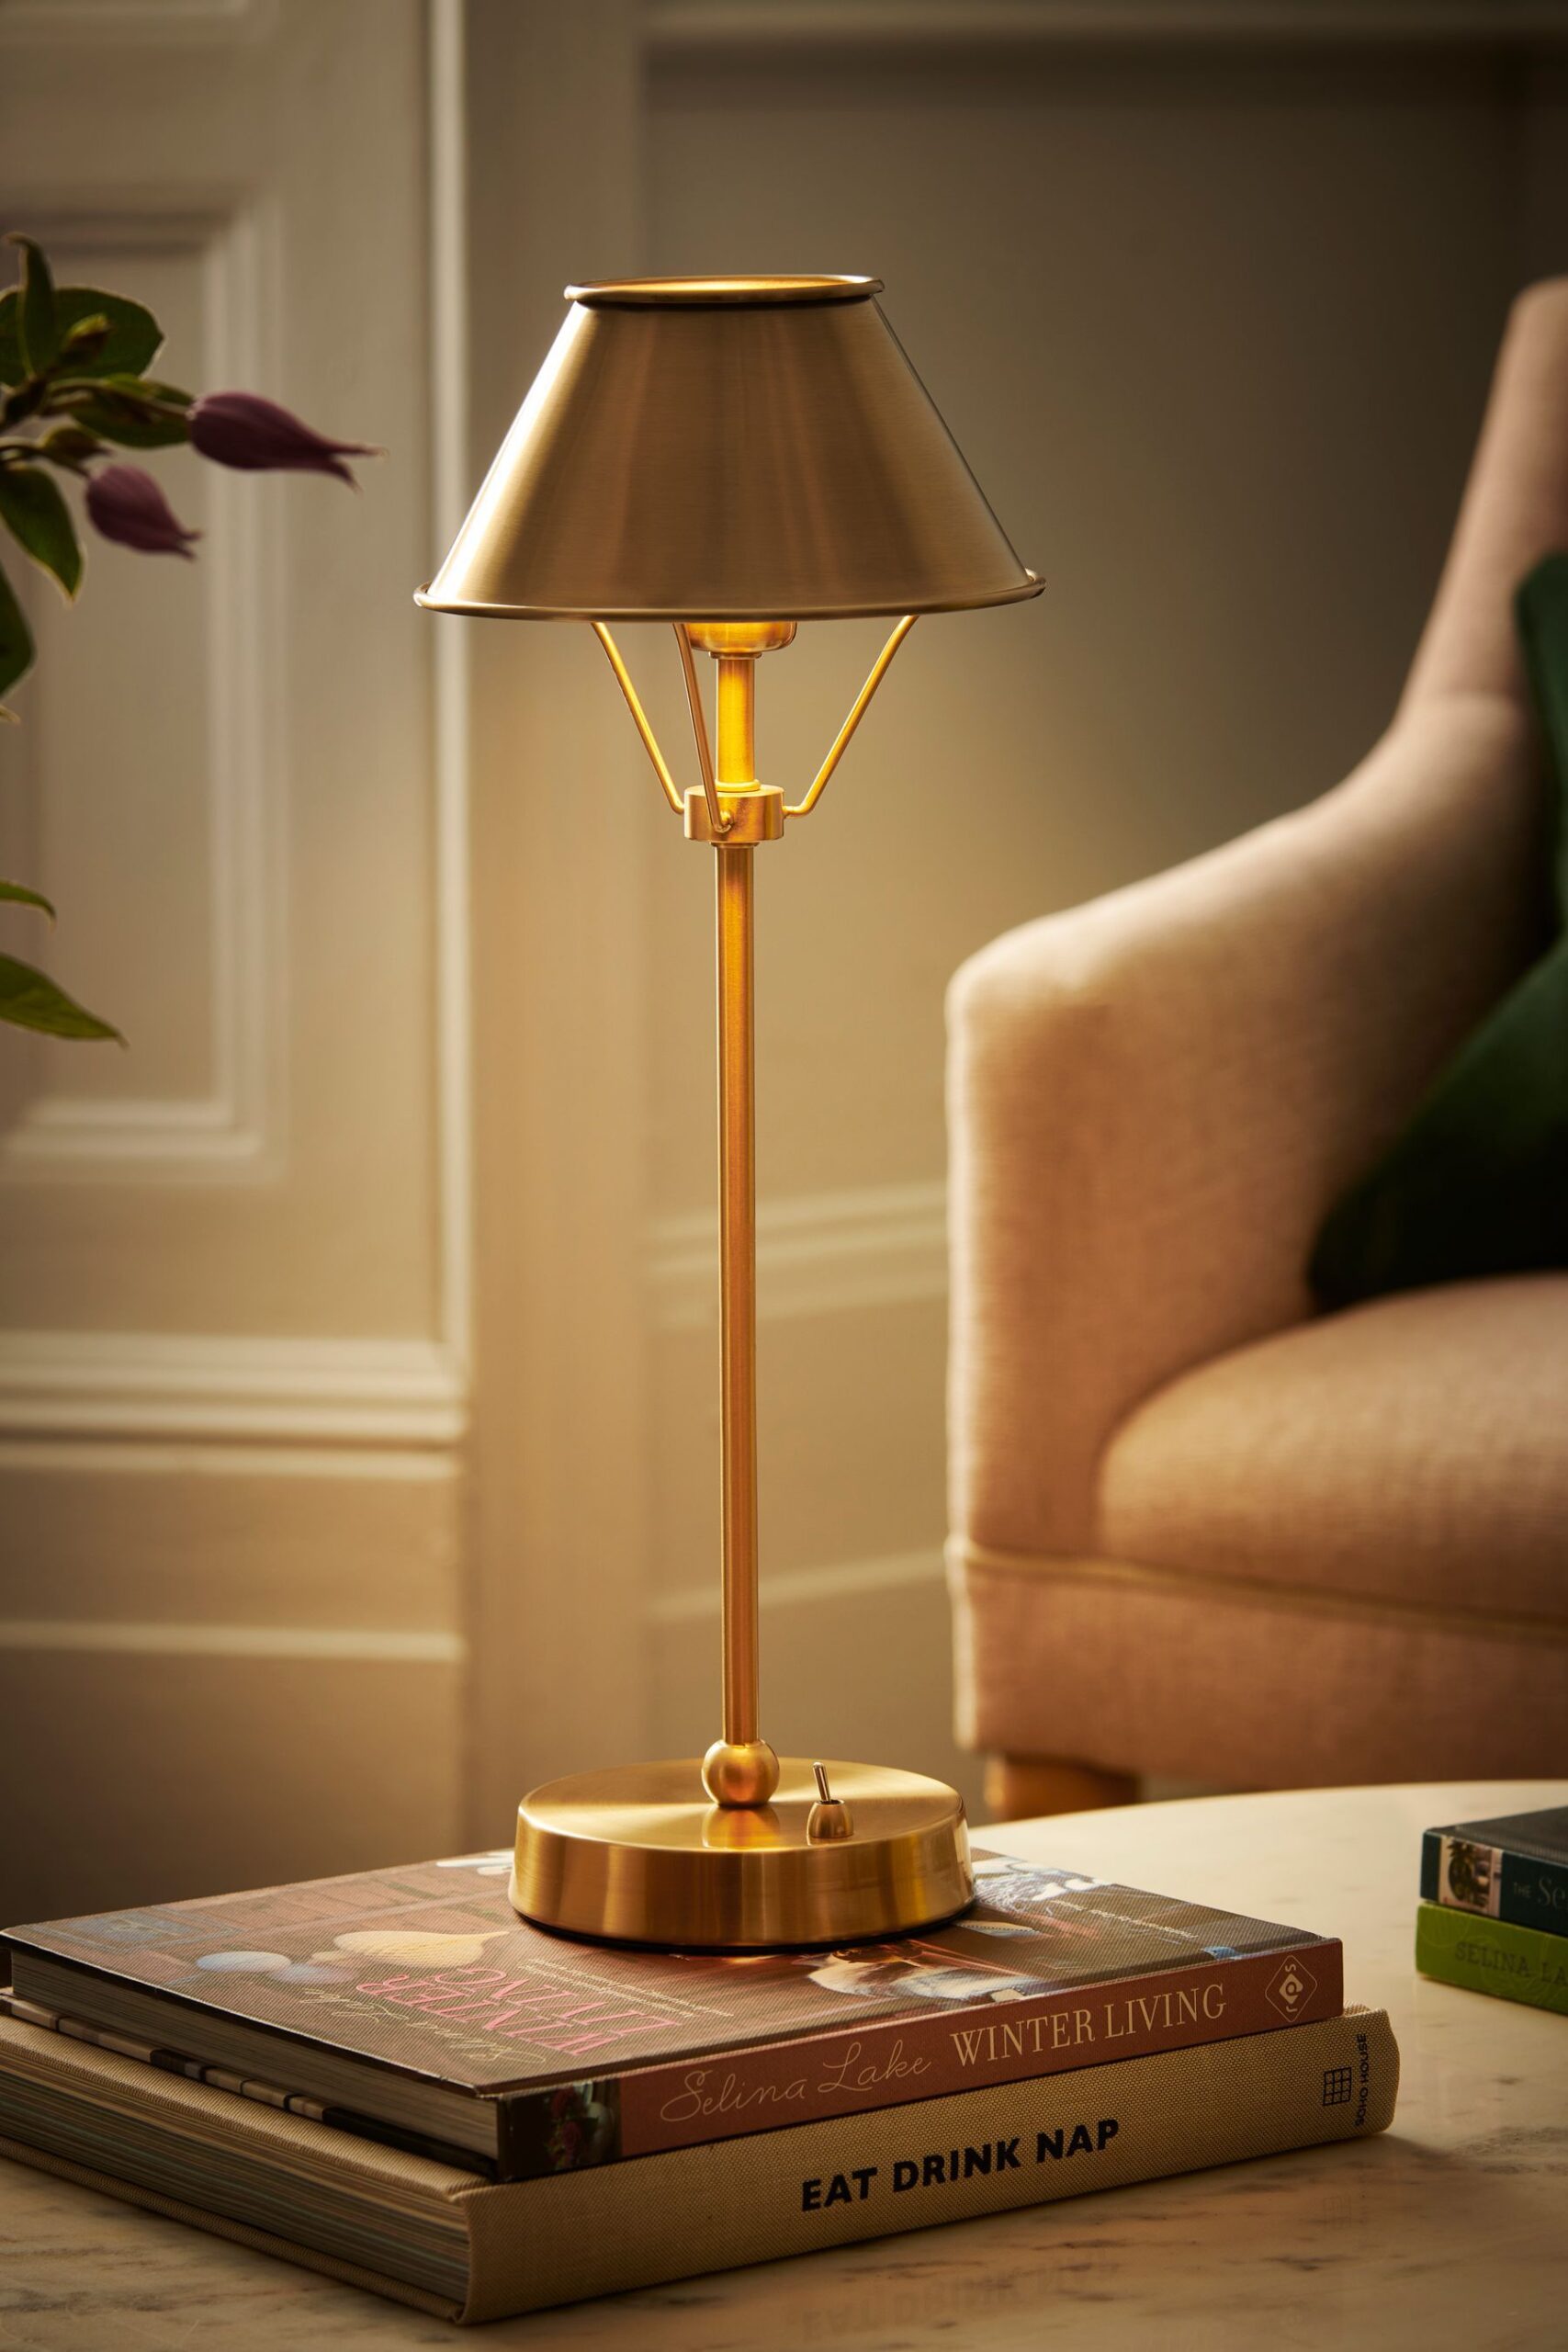 Living Room Brass Lamp : Stunning Living Room Brass Lamp Adds Elegance to Any Space